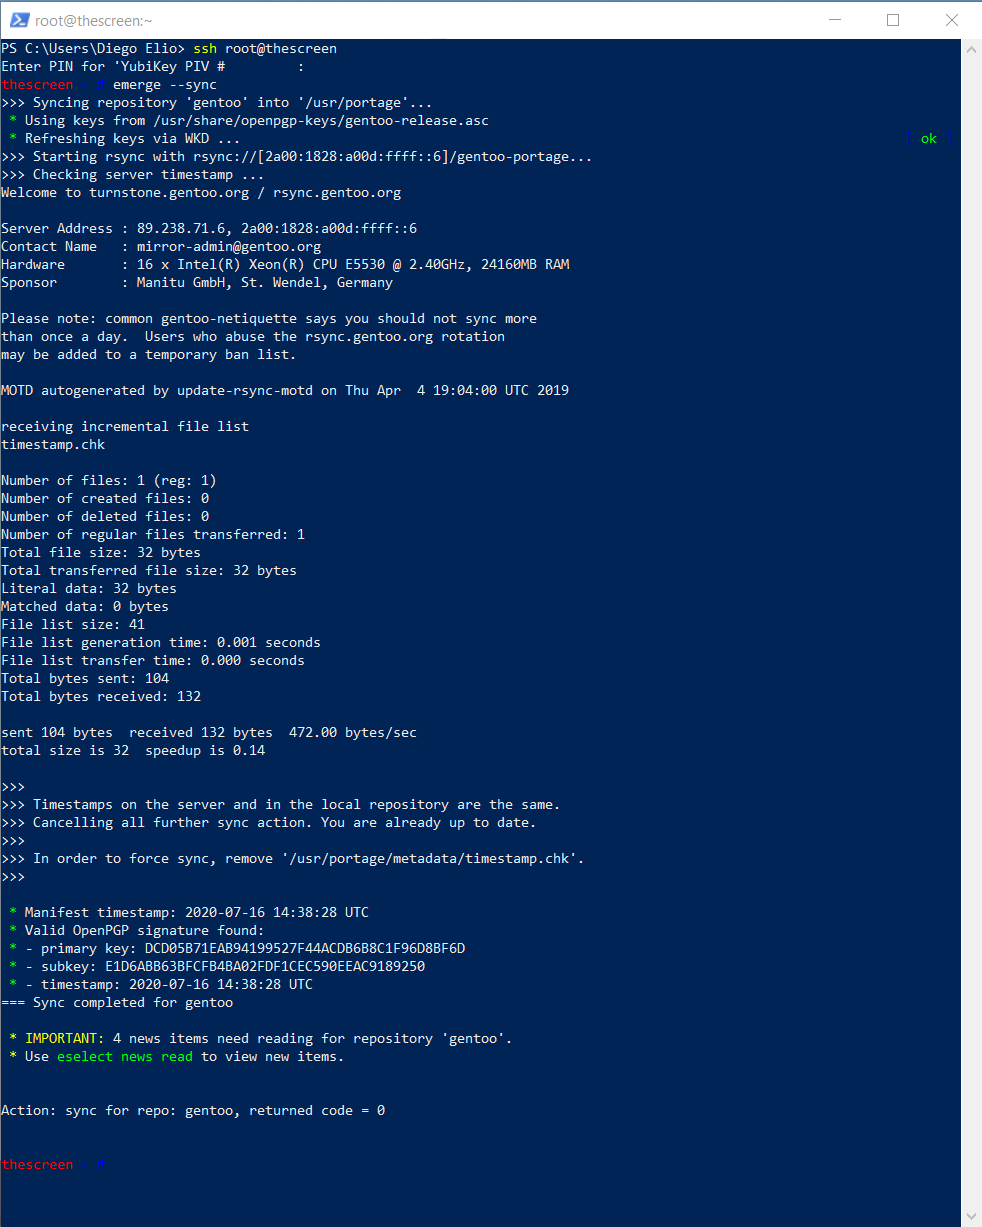 Screenshot of Windows PowerShell using a YubiKey 5 to authenticate to a Gentoo Linux system.